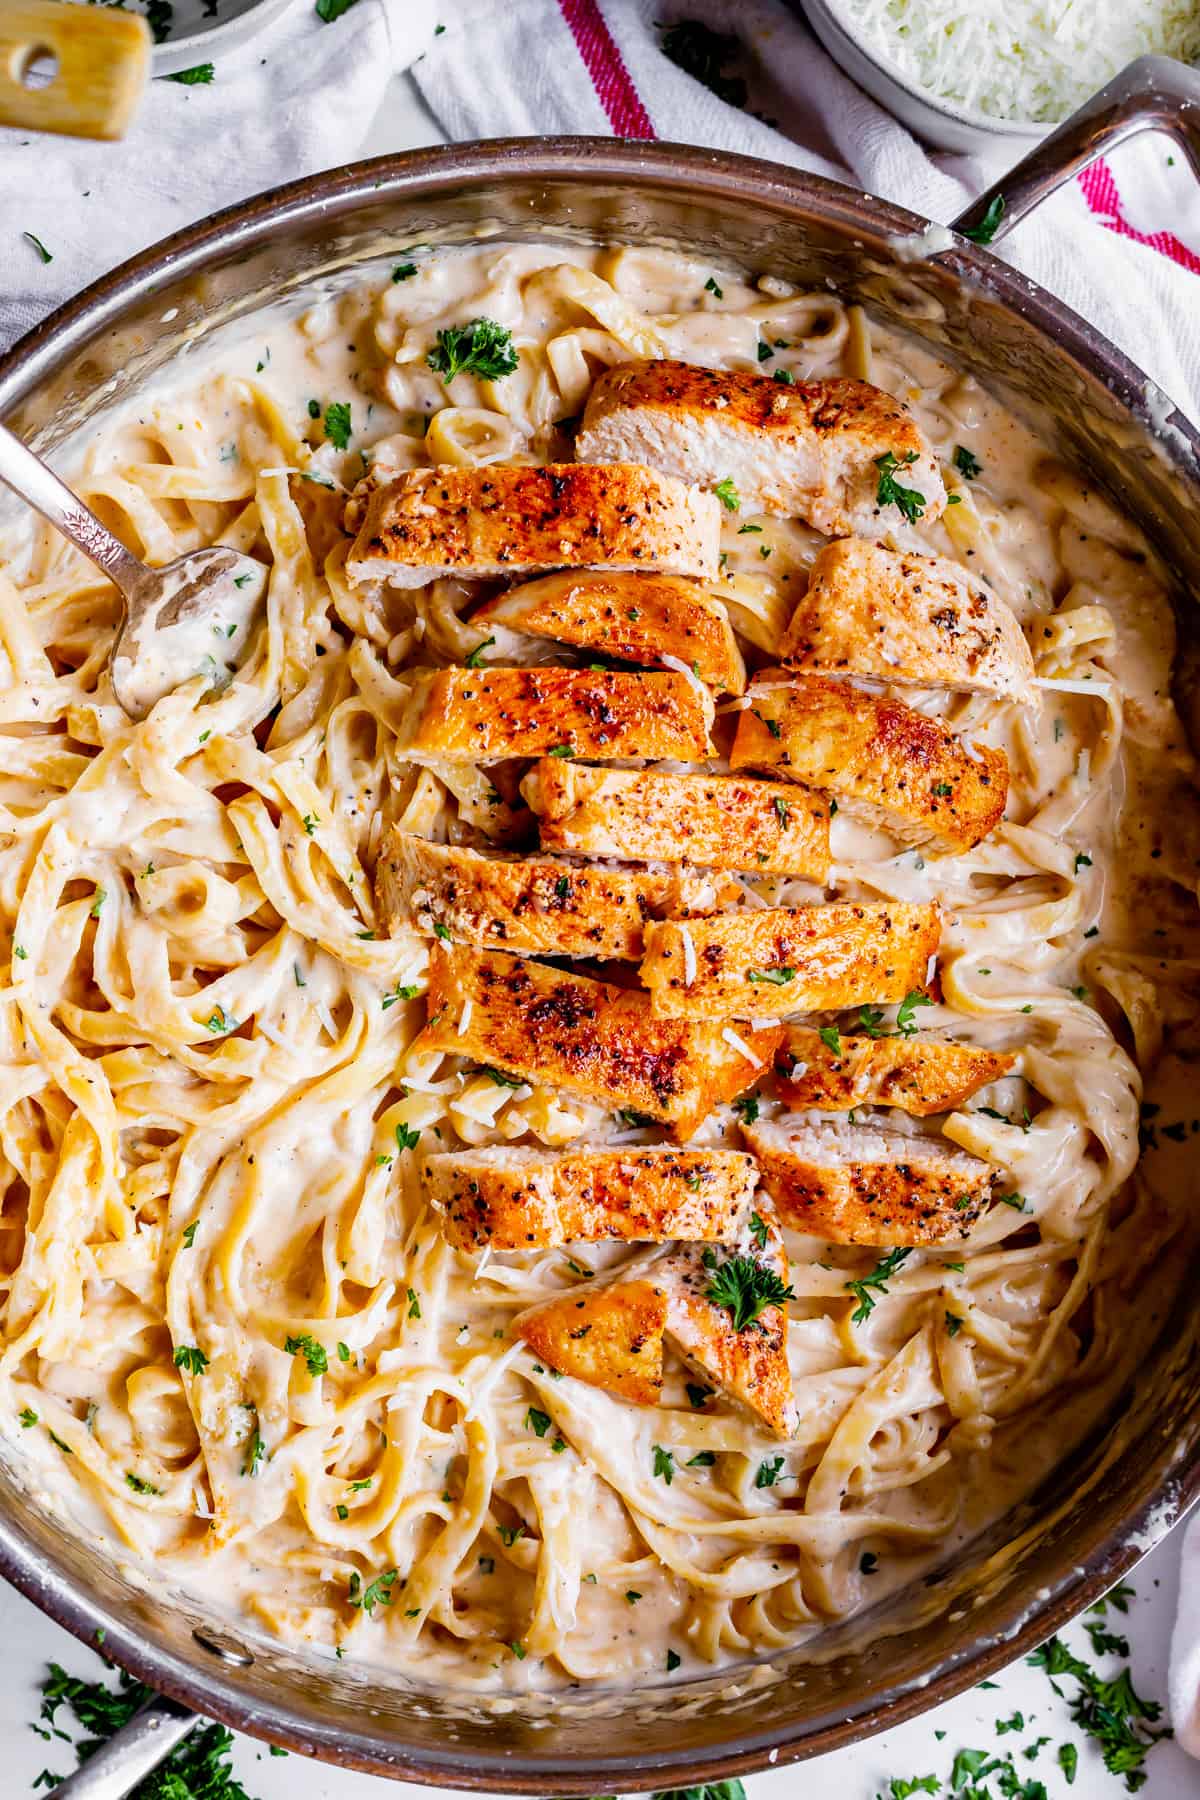 sliced pieces of cooked chicken in a pan of creamy pasta